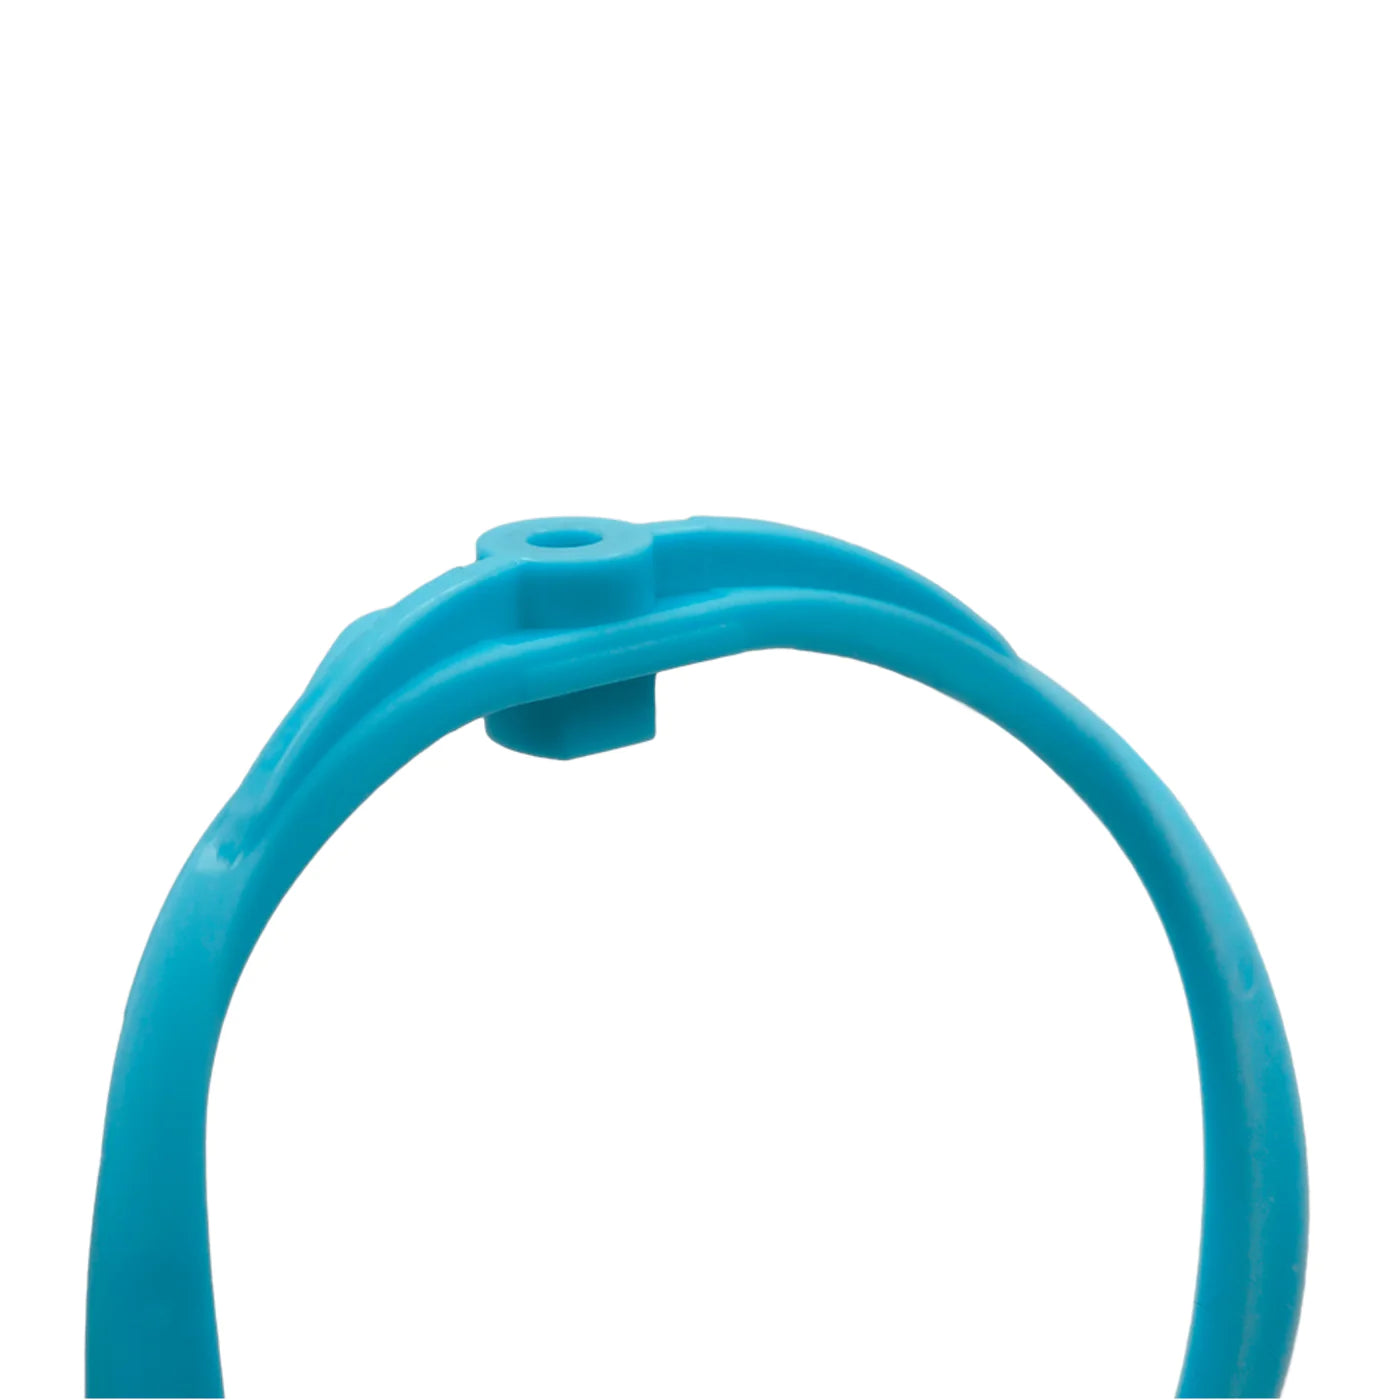 Pair of RAD-2 Hoops, Soft Firmness (Light Blue - Hoops Only)